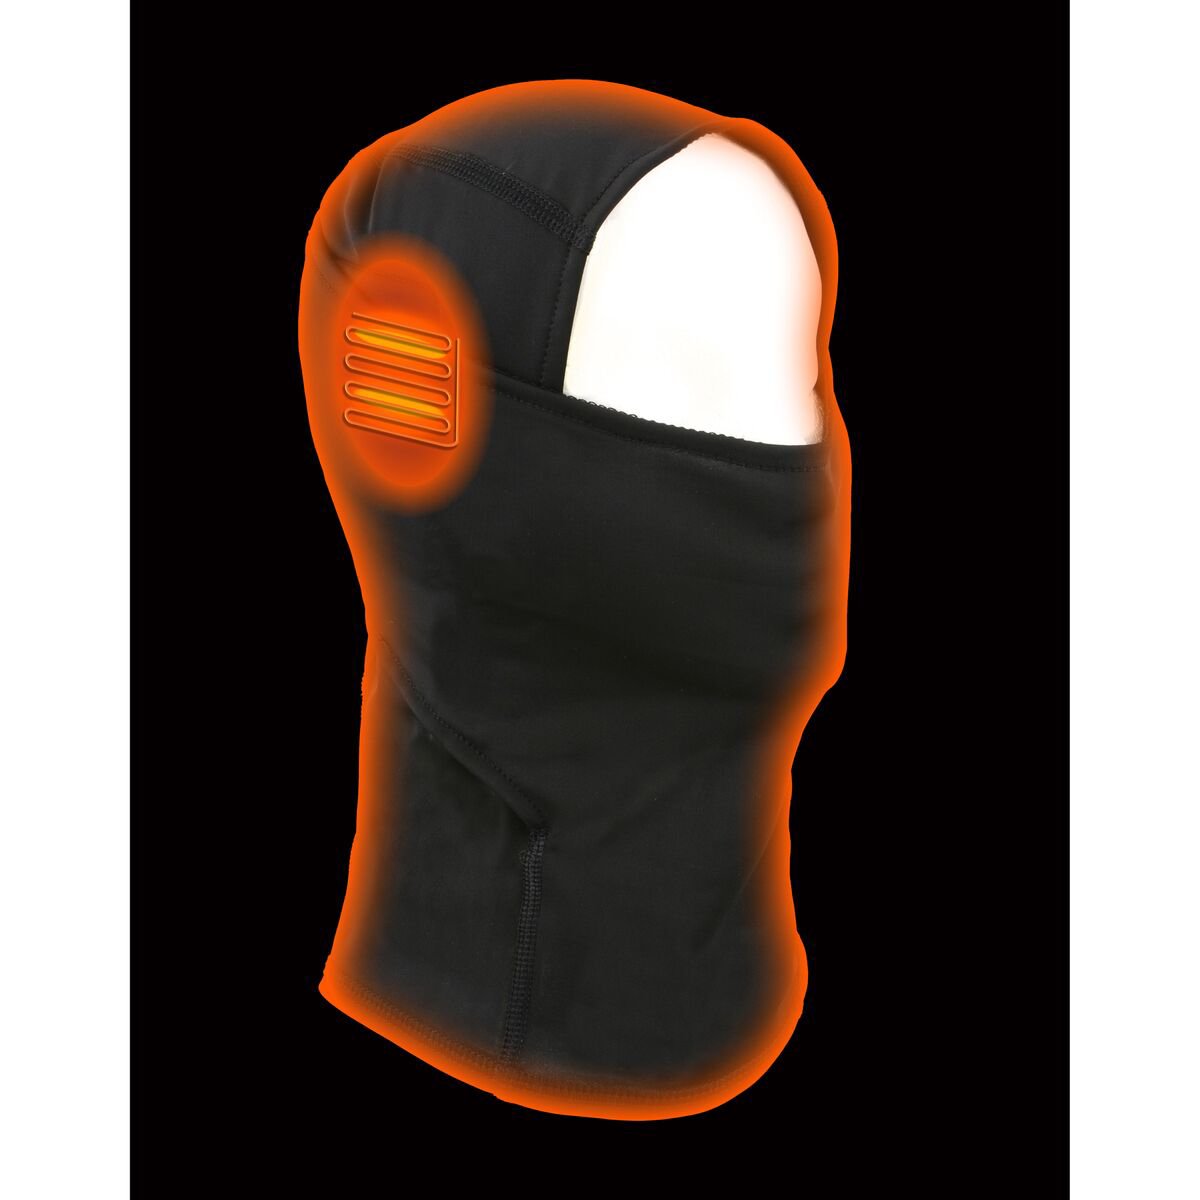 Milwaukee Leather MP7922FMSET Black 'Heated' Balaclava Covering Face, Head and Neck (Battery Pack Included)